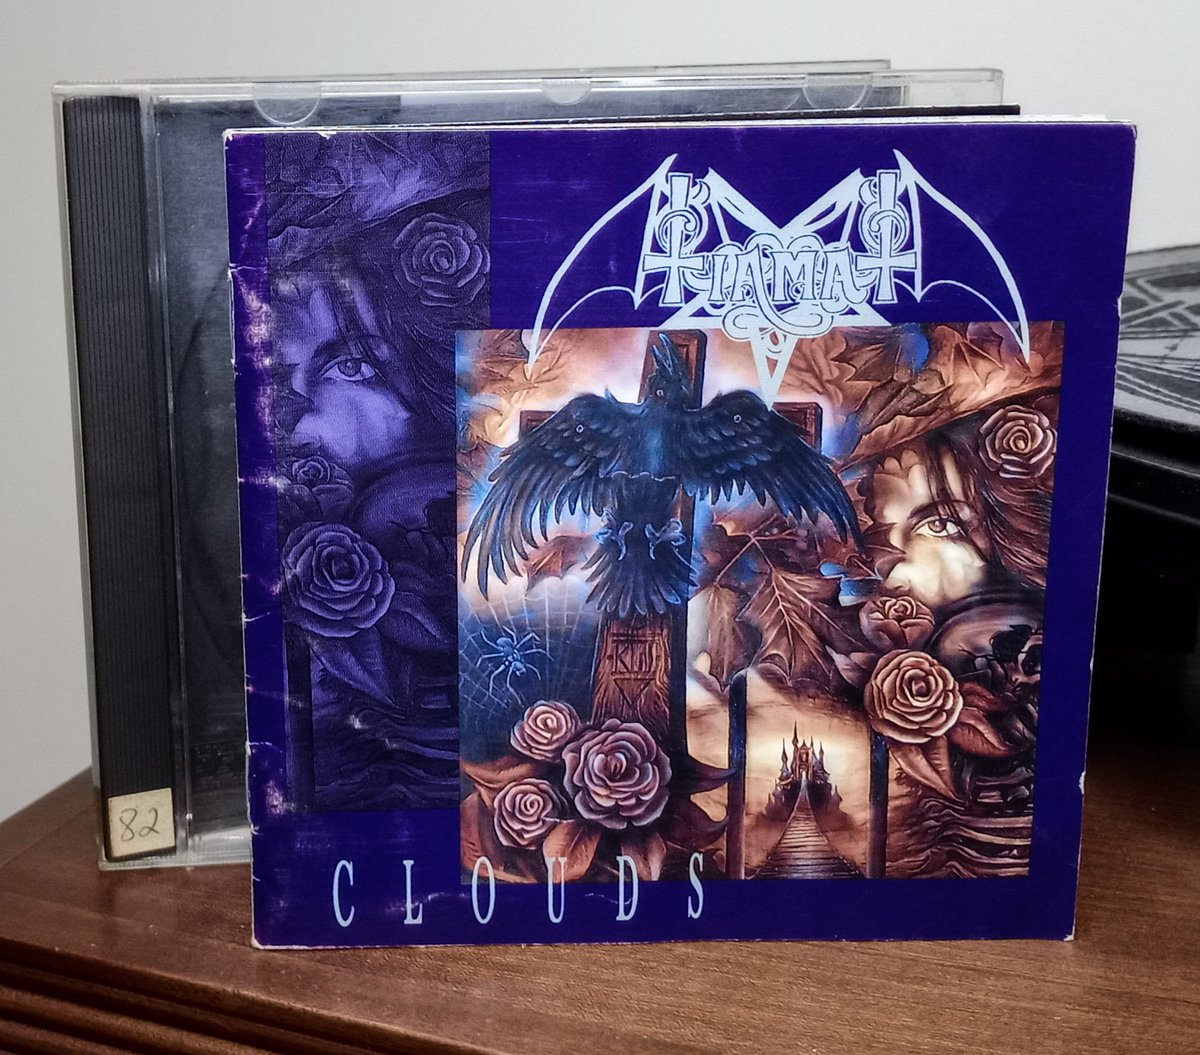 'She stops the bleeding in my soul... She is fresh air in this stinking world' 🍻

🇸🇪 TIAMAT: 'Clouds' (1992)

🎧 youtu.be/KPS4HEc8KLQ

#Tiamat #Clouds #Metal #DoomMetal #NowPlaying #DeathMetal #Playlist #CD #MetalTwitter #90sMetal #GothicMetal #CenturyMedia